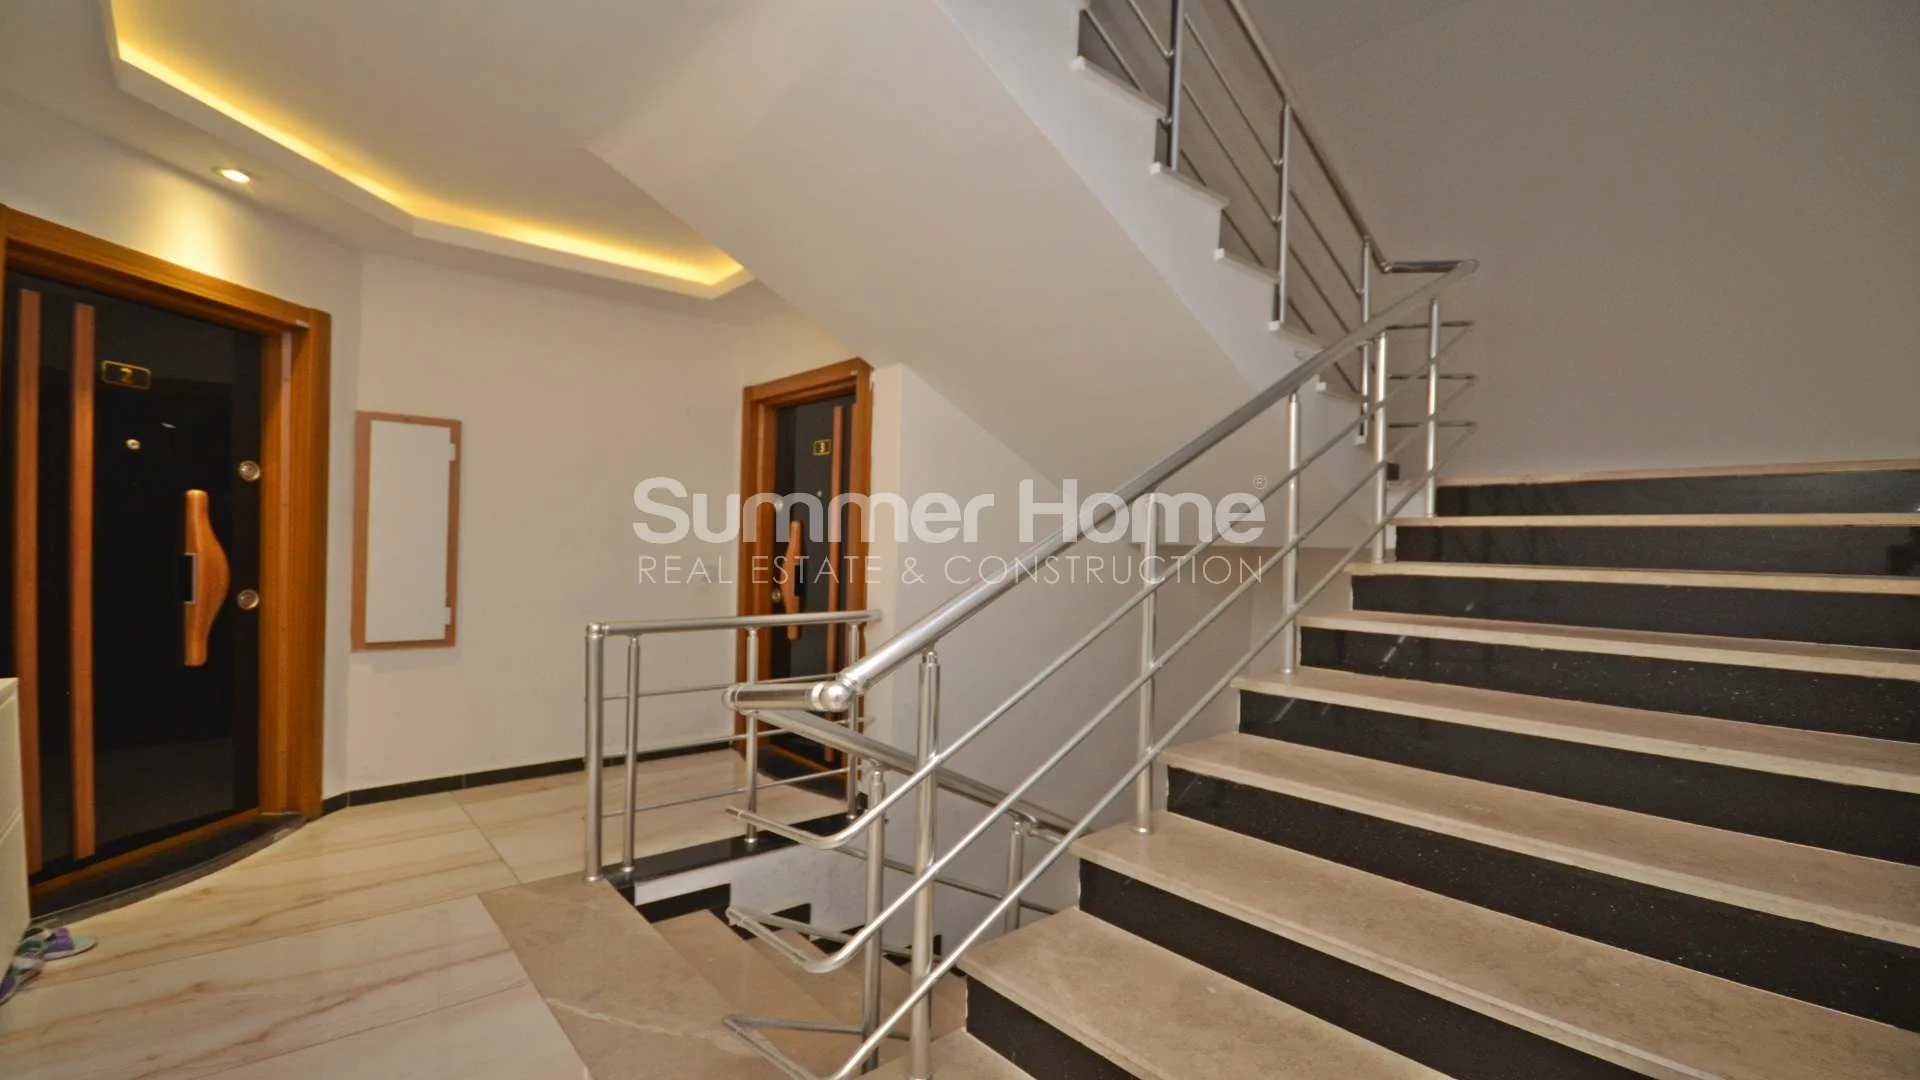 For sale Apartment Alanya Hasbahce Interior - 25